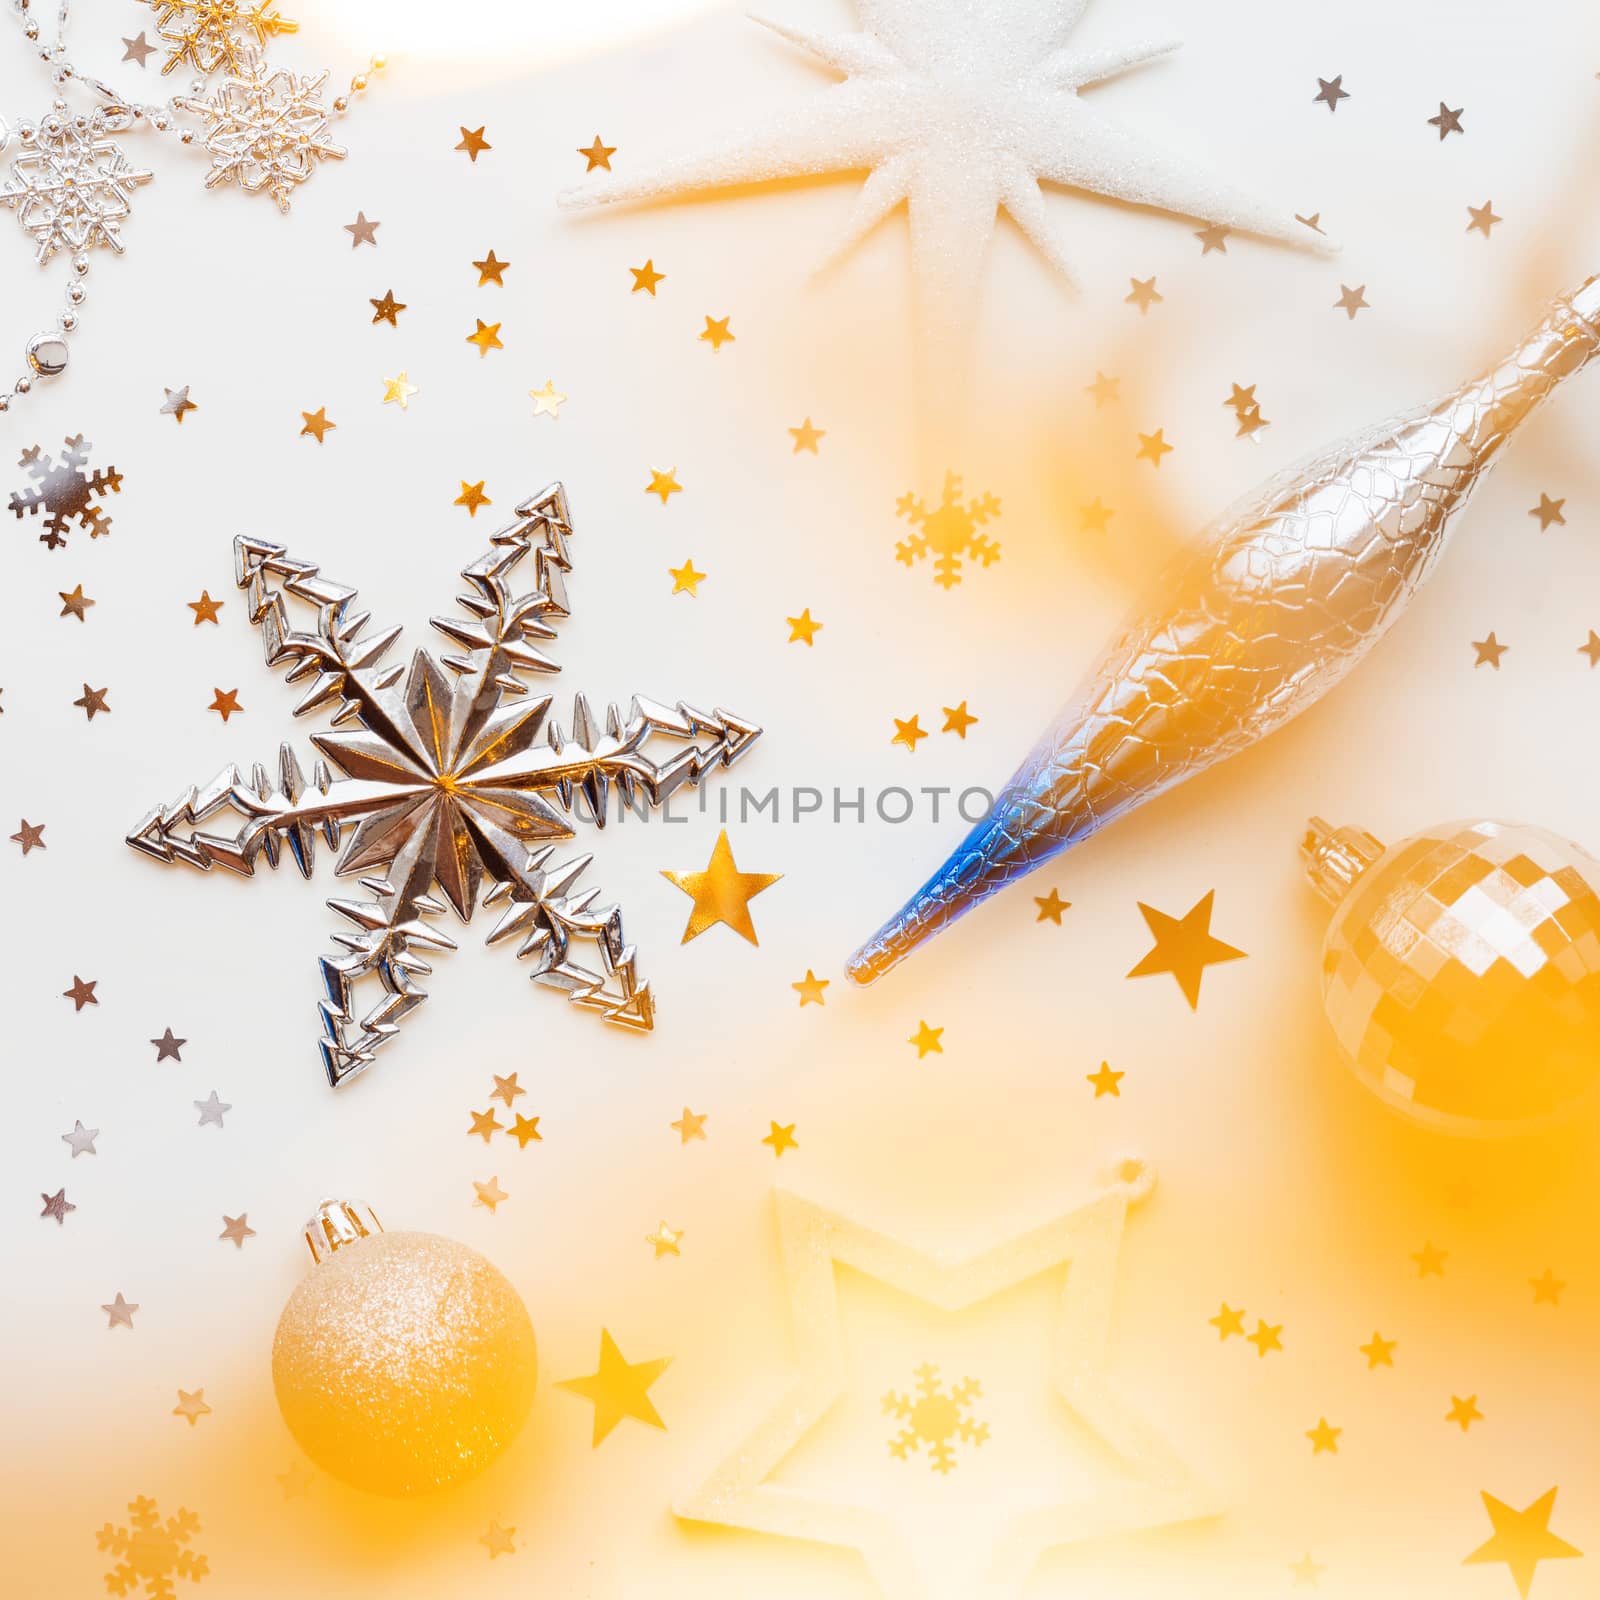 Christmas and New Year holiday background with decorations and light bulbs. Silver and blue shining balls, white snowflakes and star confetti. Flat lay, top view.